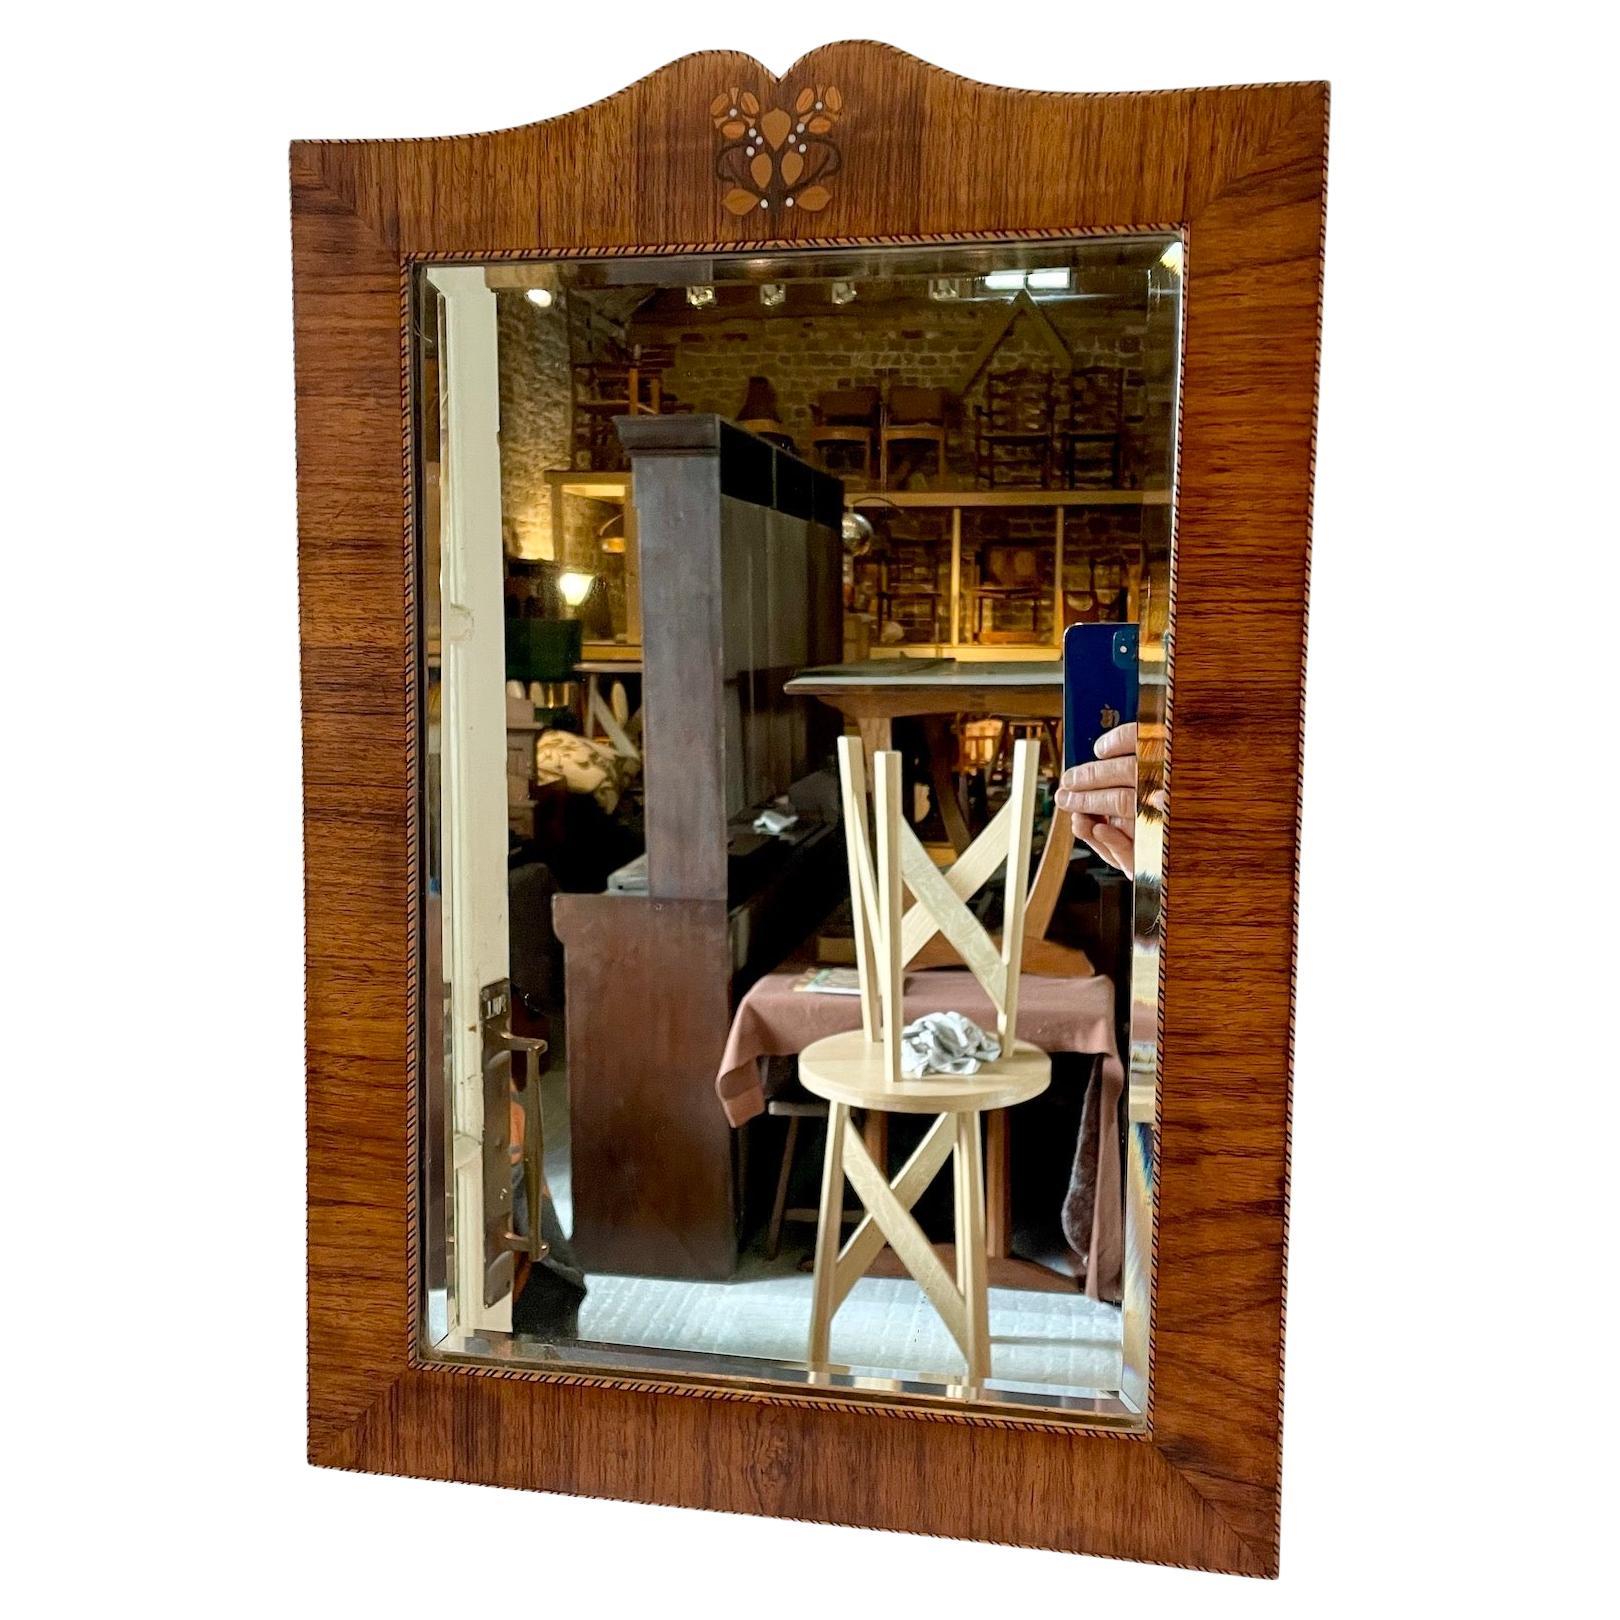 A very pretty Arts & Crafts wall mirror
The frame is made from rosewood
With a decorative mother of pearl and fruit wood inlay floral design to the top
There is a chequerboard inlay design to the perimeter
Circa 1900